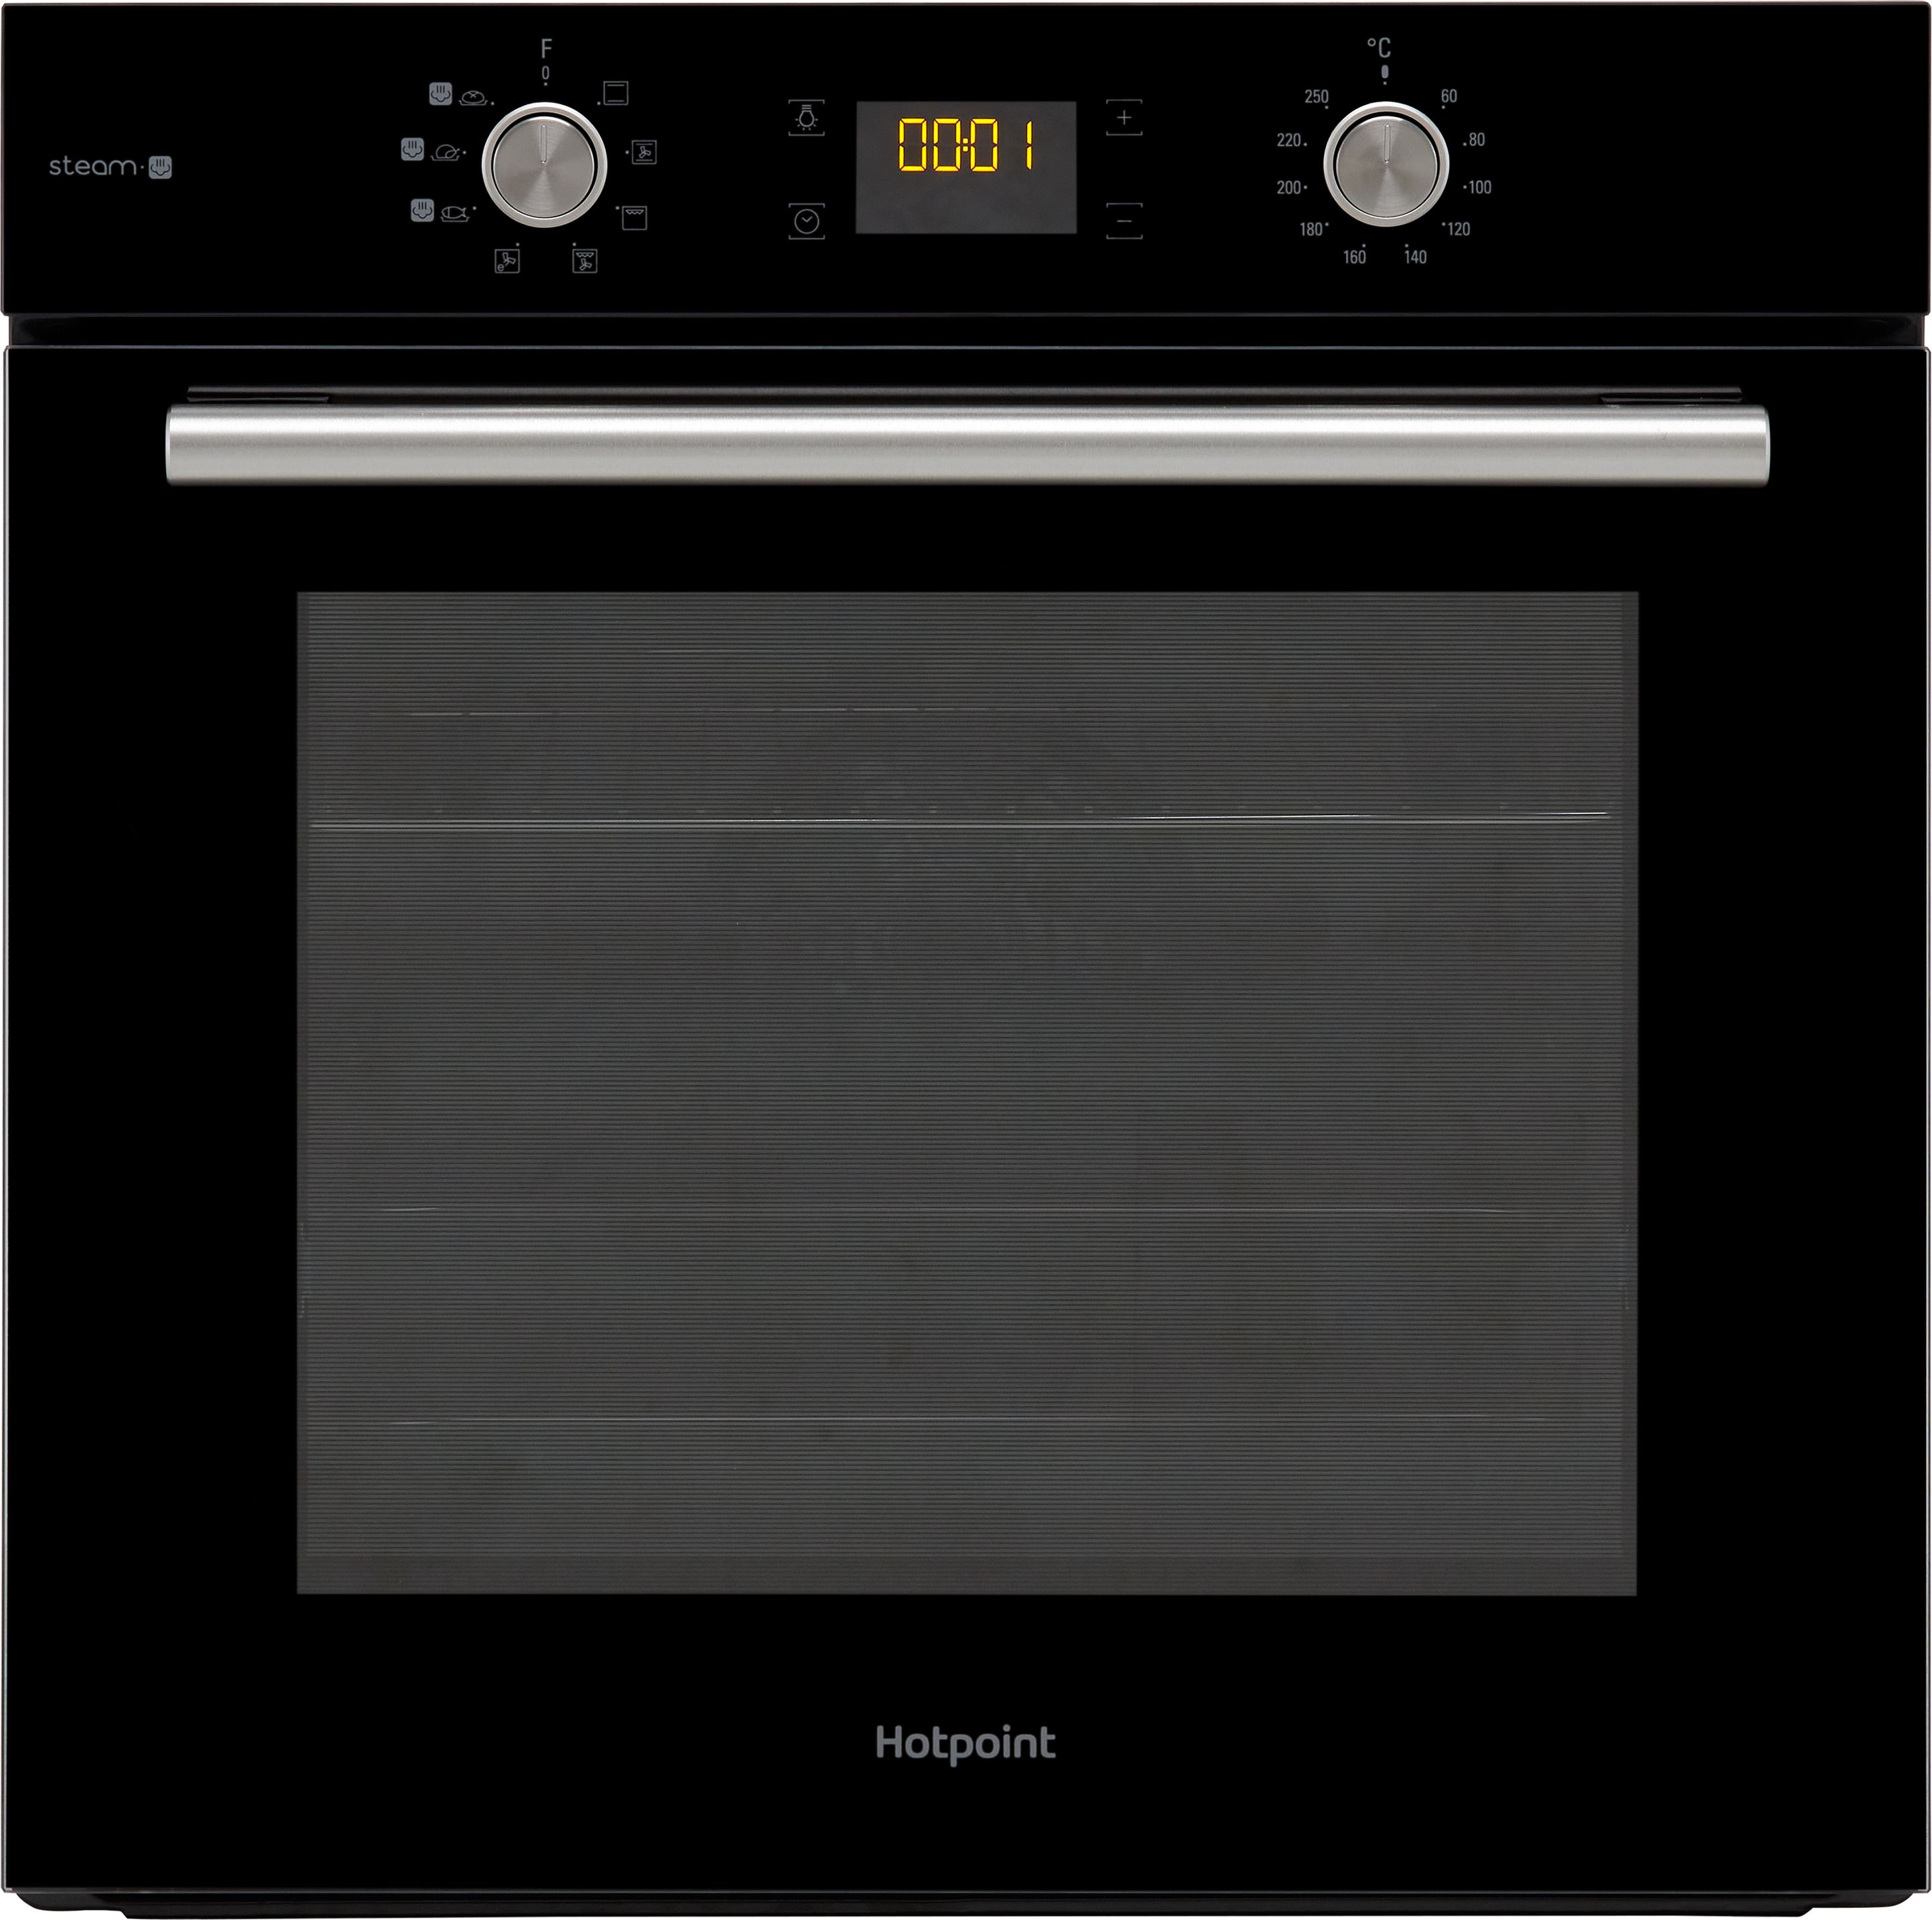 Hotpoint Class 4 FA4S541JBLGH Built In Electric Single Oven - Black - A Rated, Black